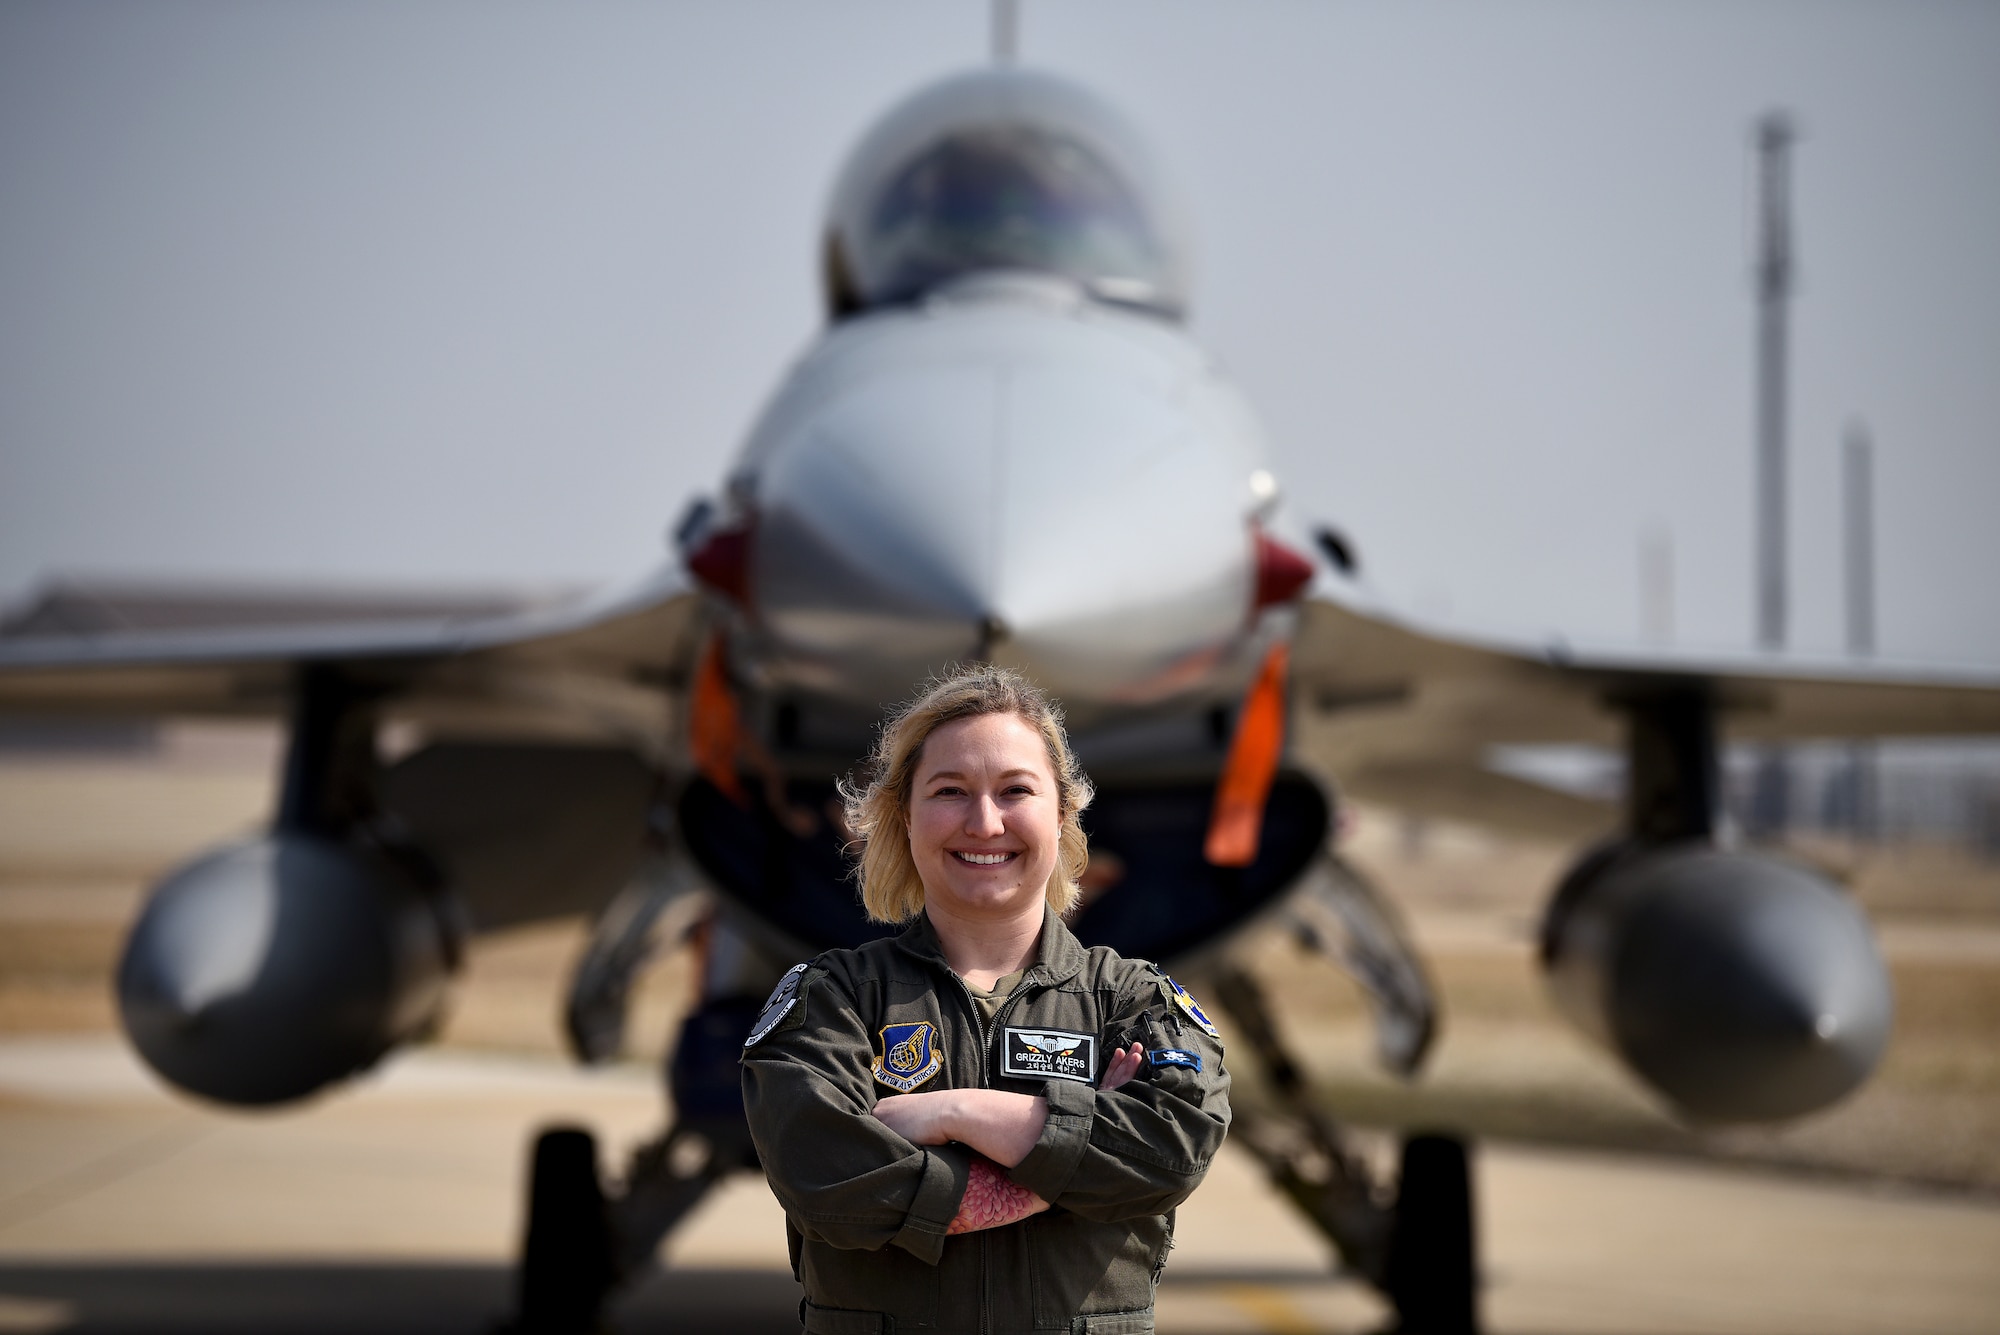 First Lt. “Grizzly” Akers, 35th Fighter Squadron F-16 Fighting Falcon pilot, poses for a photo on the flightline at Kunsan Air Base, Republic of Korea, March 8, 2021. Akers studied behavioral science at the Air Force Academy and then discovered her love for flying through their powered flight program. (U.S. Air Force photo by Senior Airman Suzie Plotnikov)